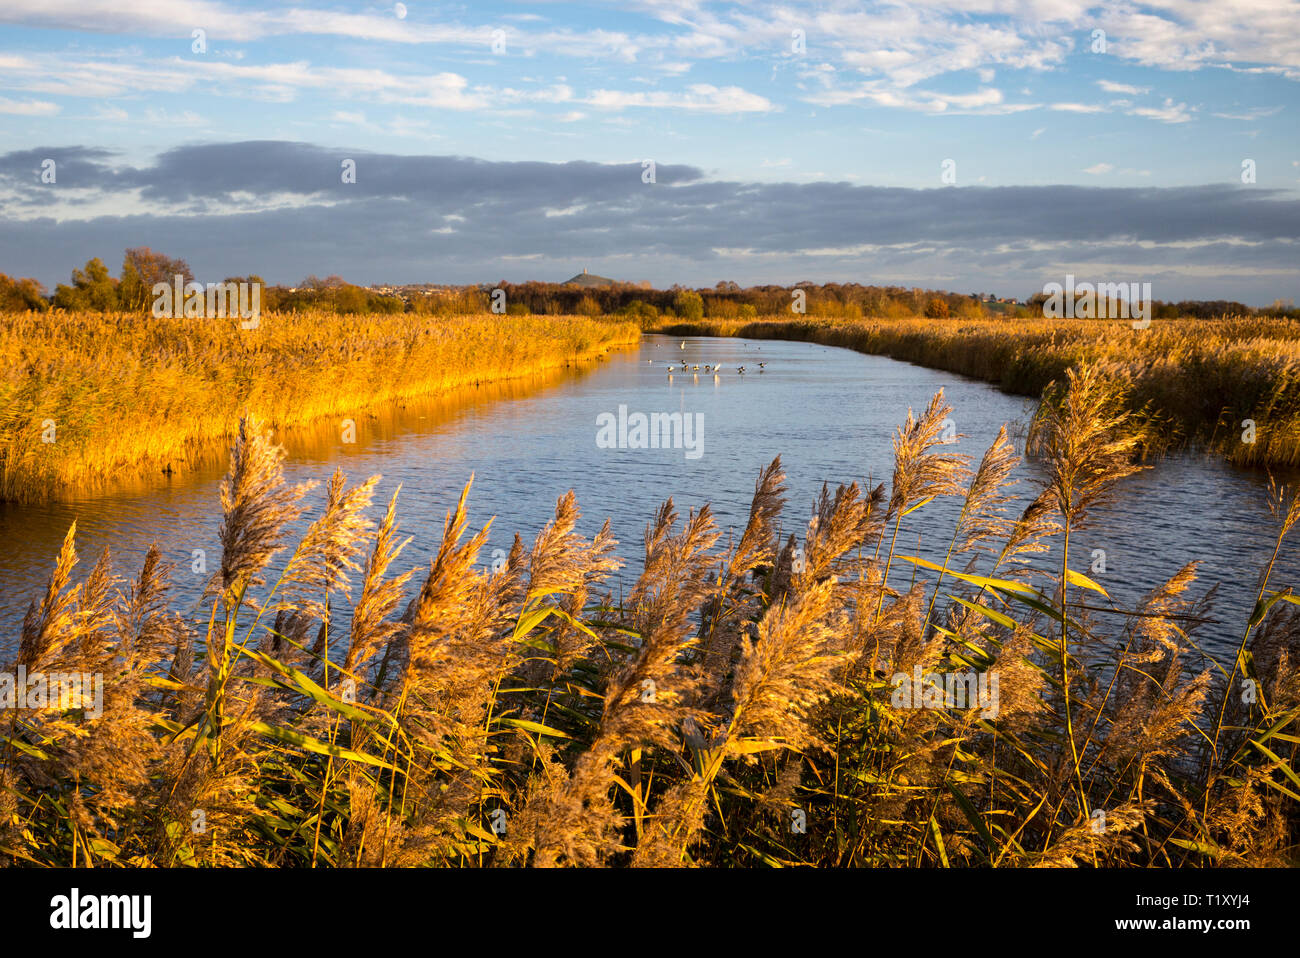 Wildfowl on marshes at the Somerset Levels wildlife nature reserve in low winter sunlight, Somerset, United Kingdom Stock Photo